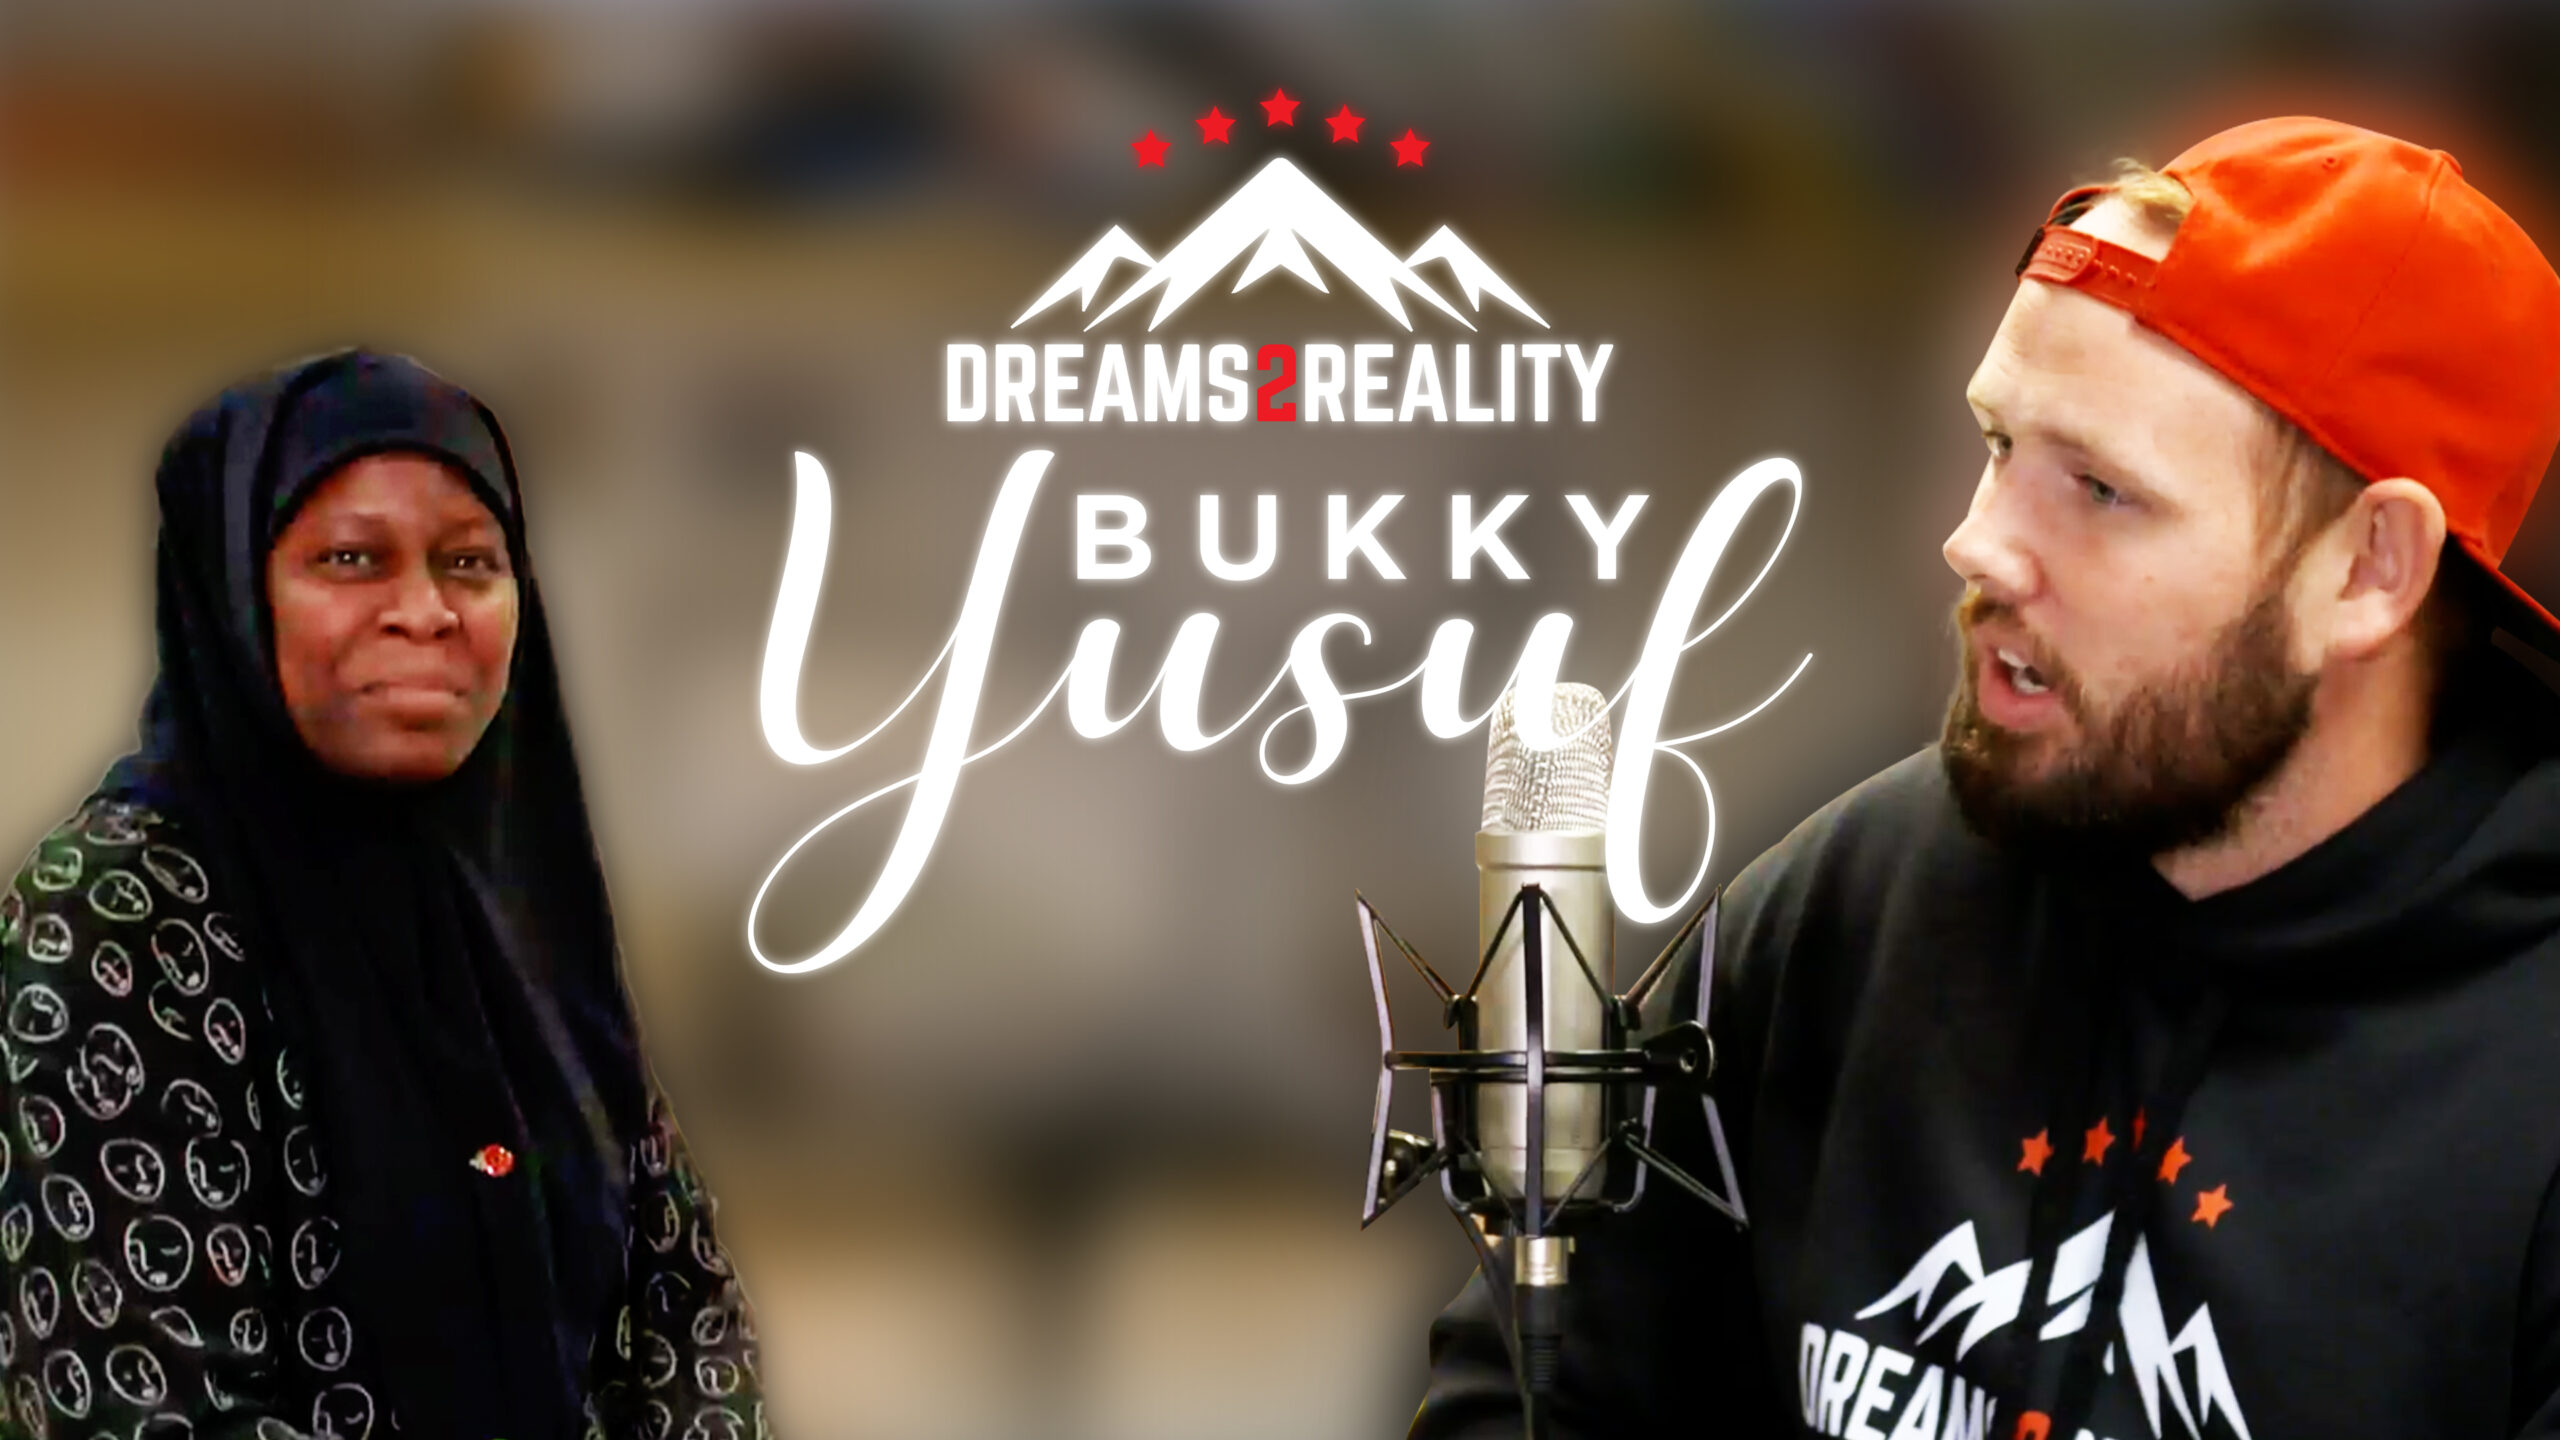 Interview – Bukky Yusuf: Education, Coaching and Wellbeing